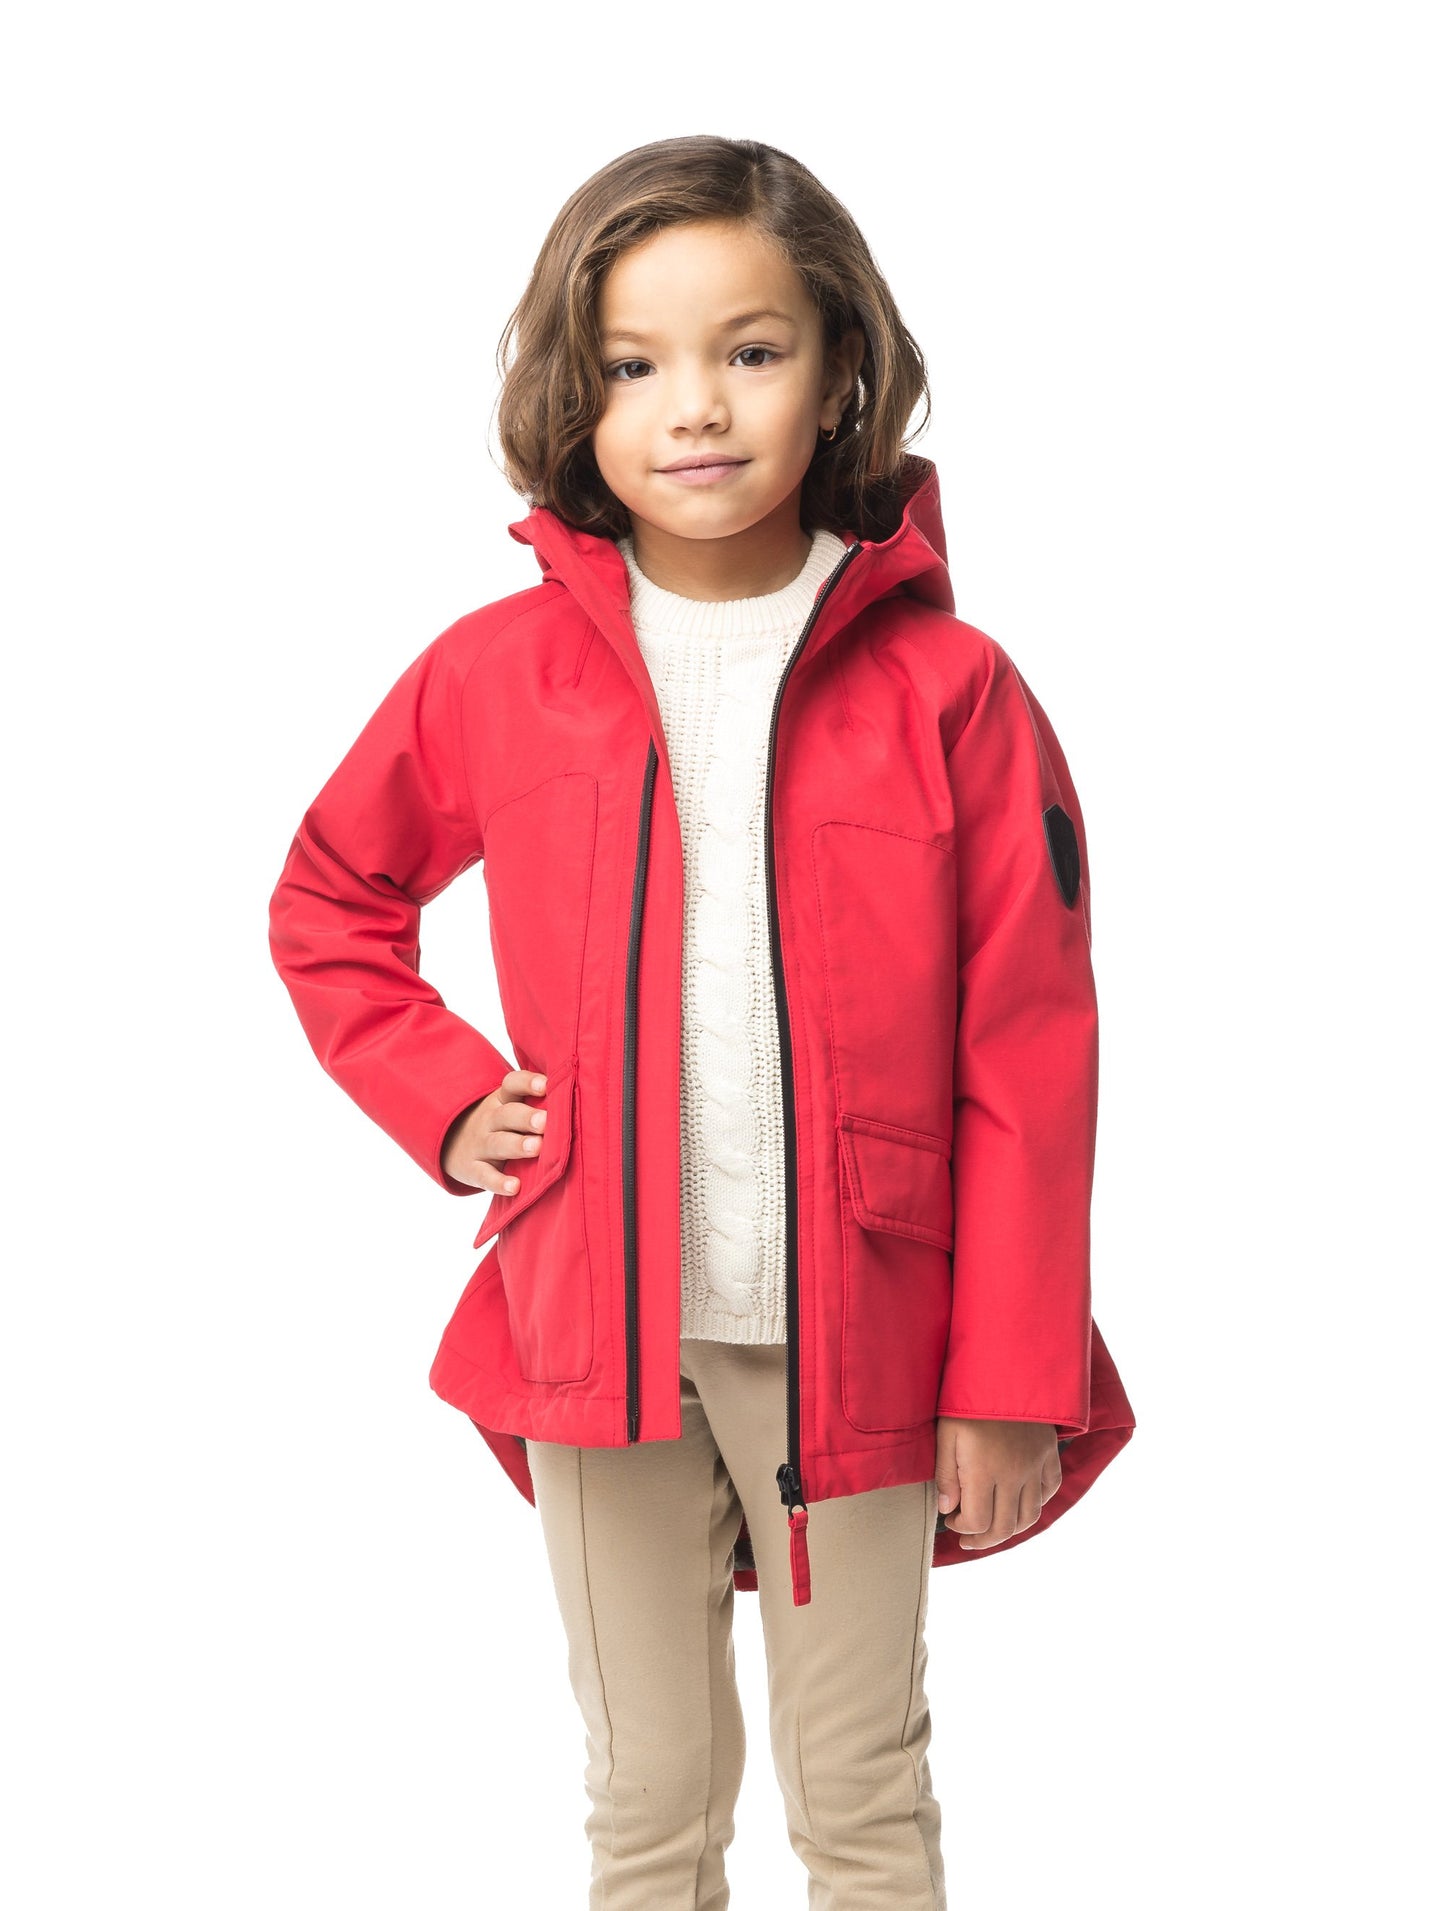 Kid's hip length fishtail rain jacket with hood in Red